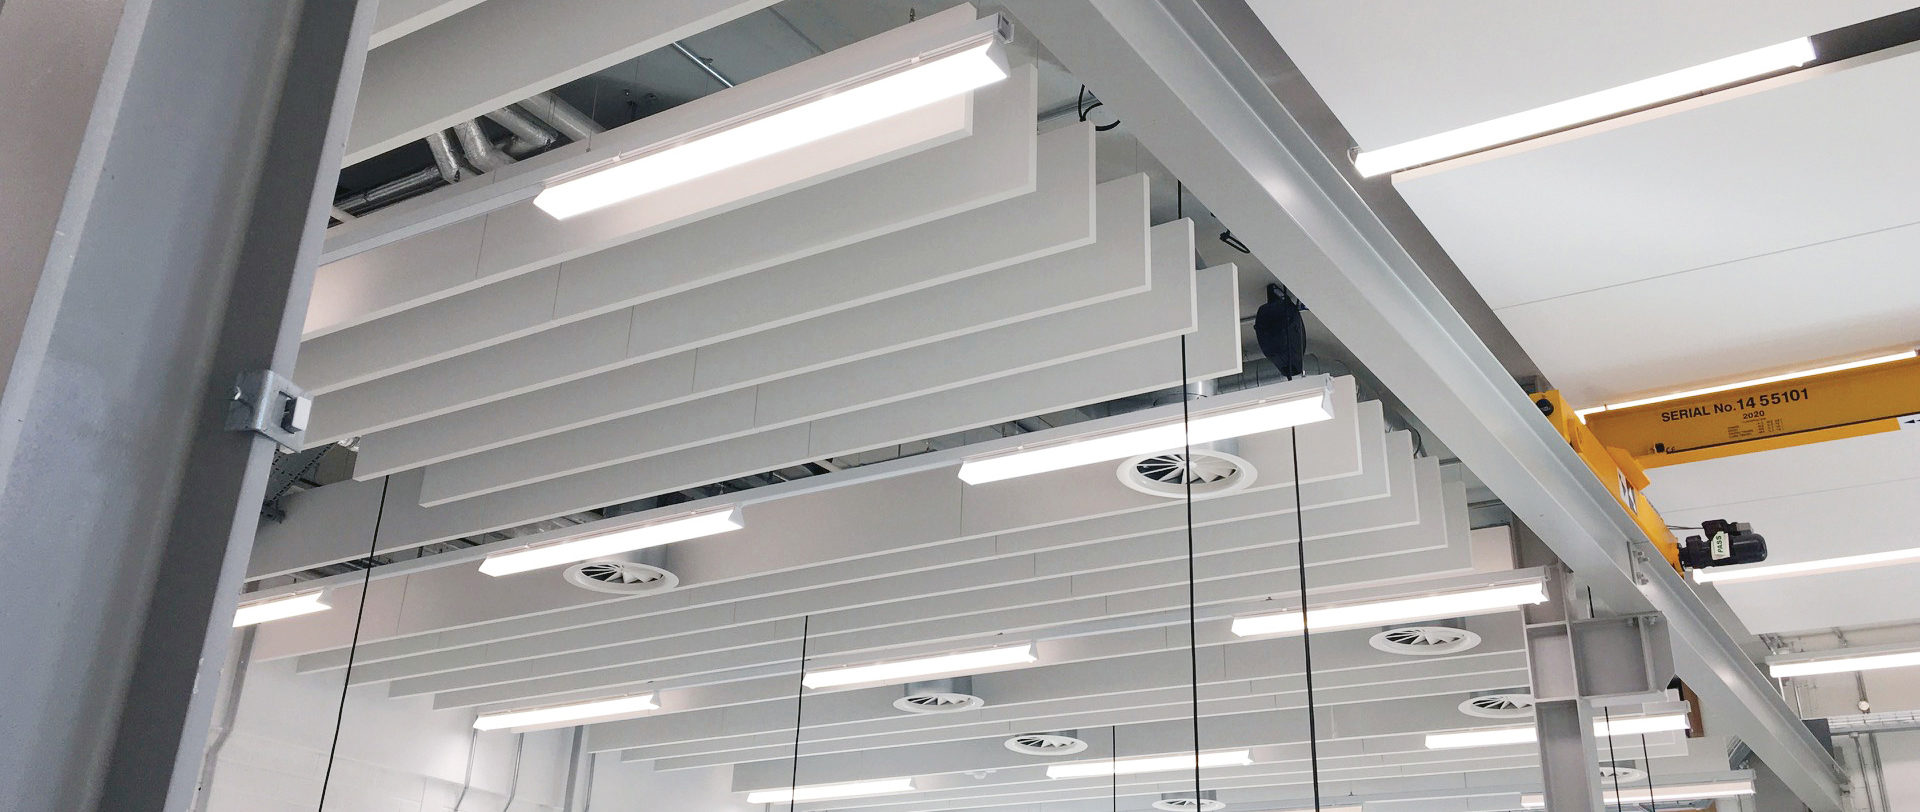 Acoustic panel suspension using Zip-Clip wire rope